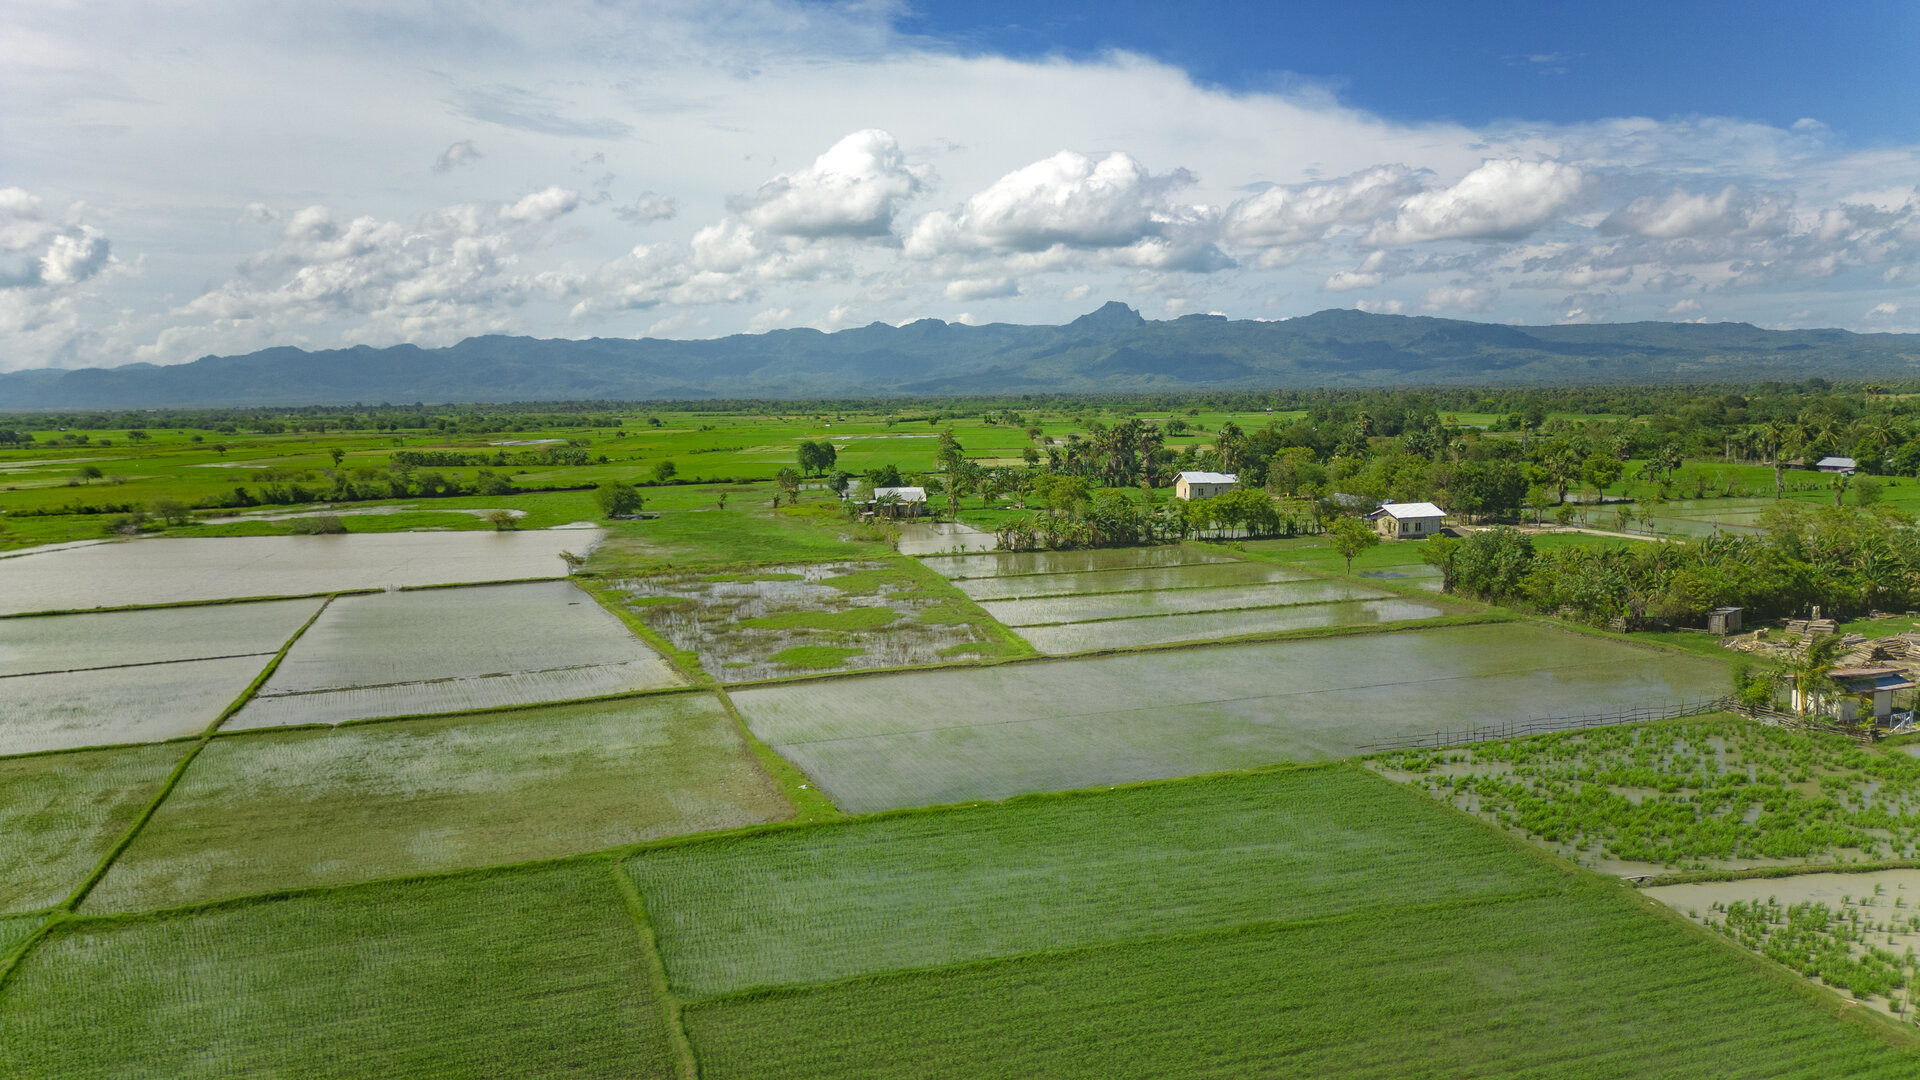 Around 45 minutes outside of Kupang, travellers can visit the Oesao Paddy Fields.